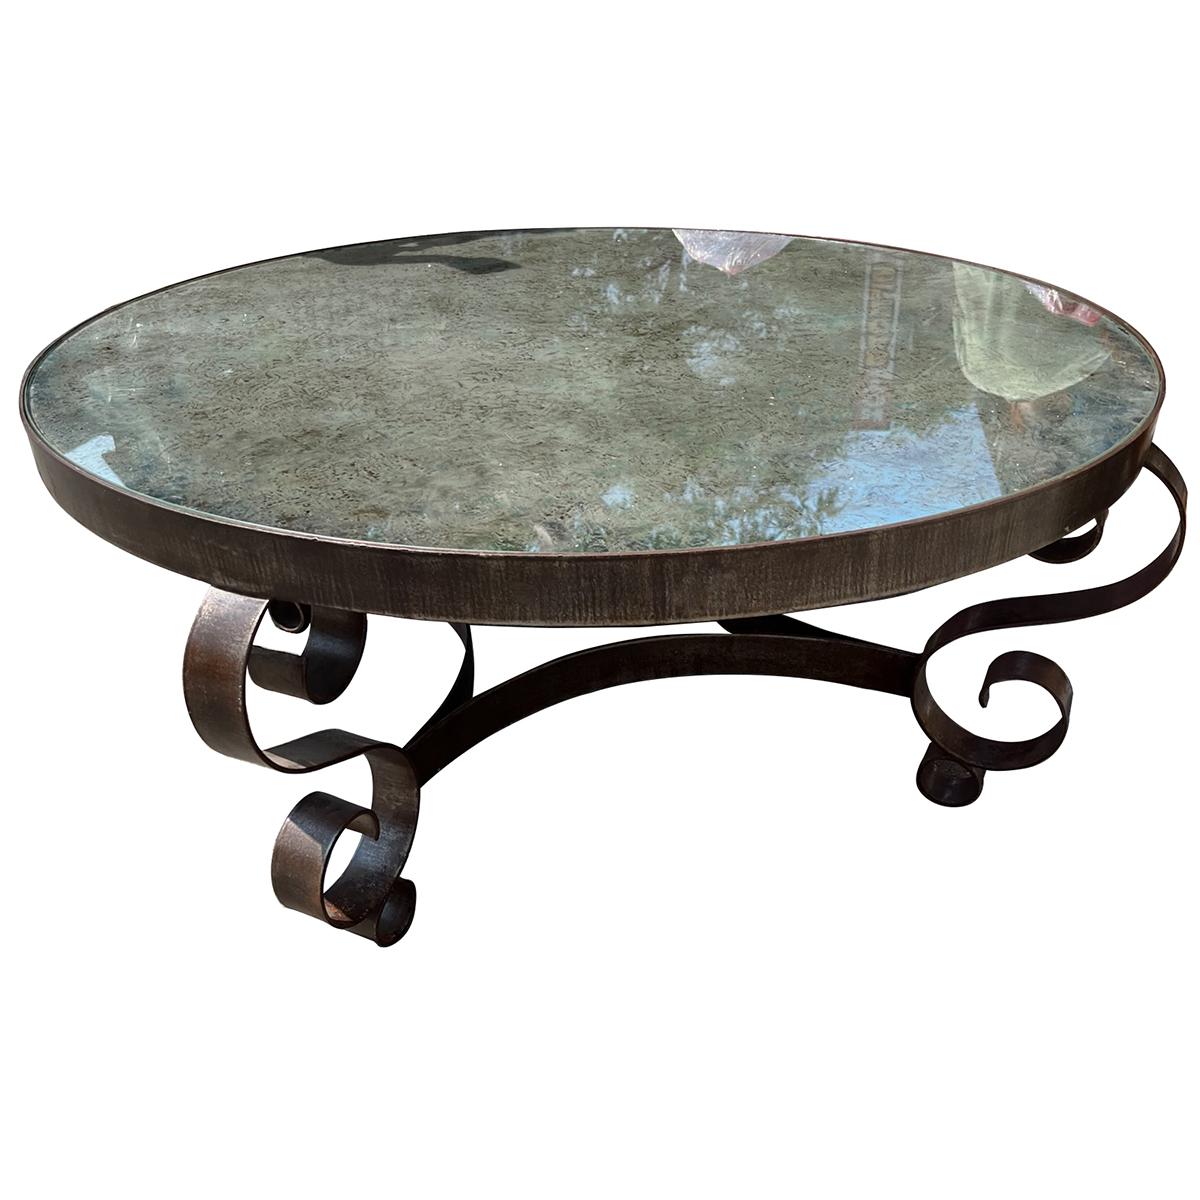 A circa 1920's French wrought iron round table with mirror top.

Measurements:
diameter: 41.5